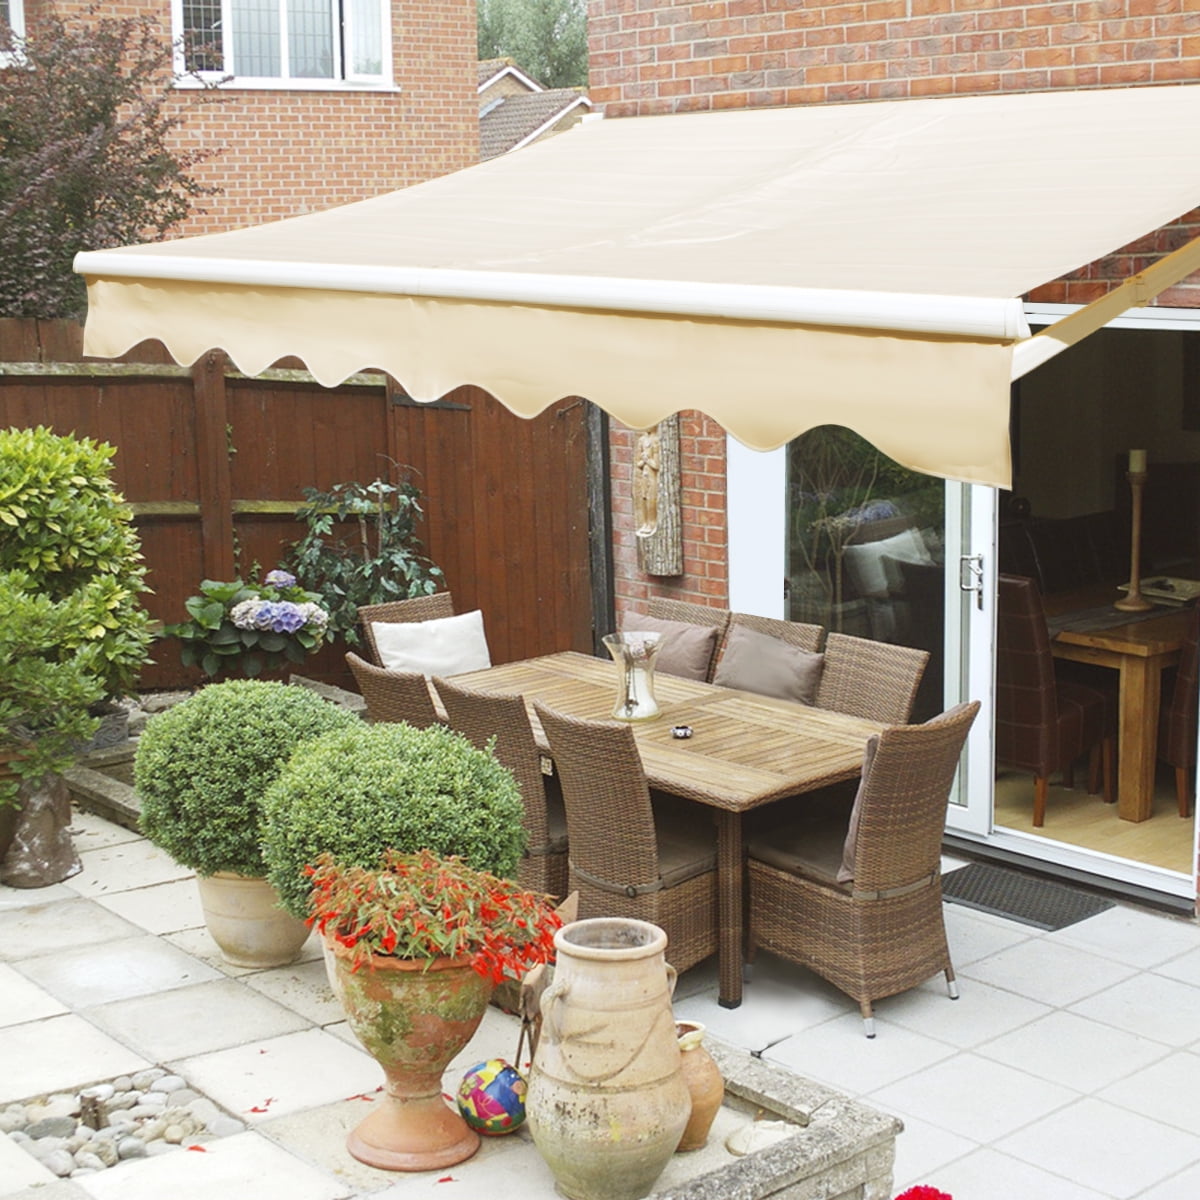 Beige 9TRADING 6.5X5.0 Manual Patio Canopy Retractable Deck Awning Sunshade Shelter 